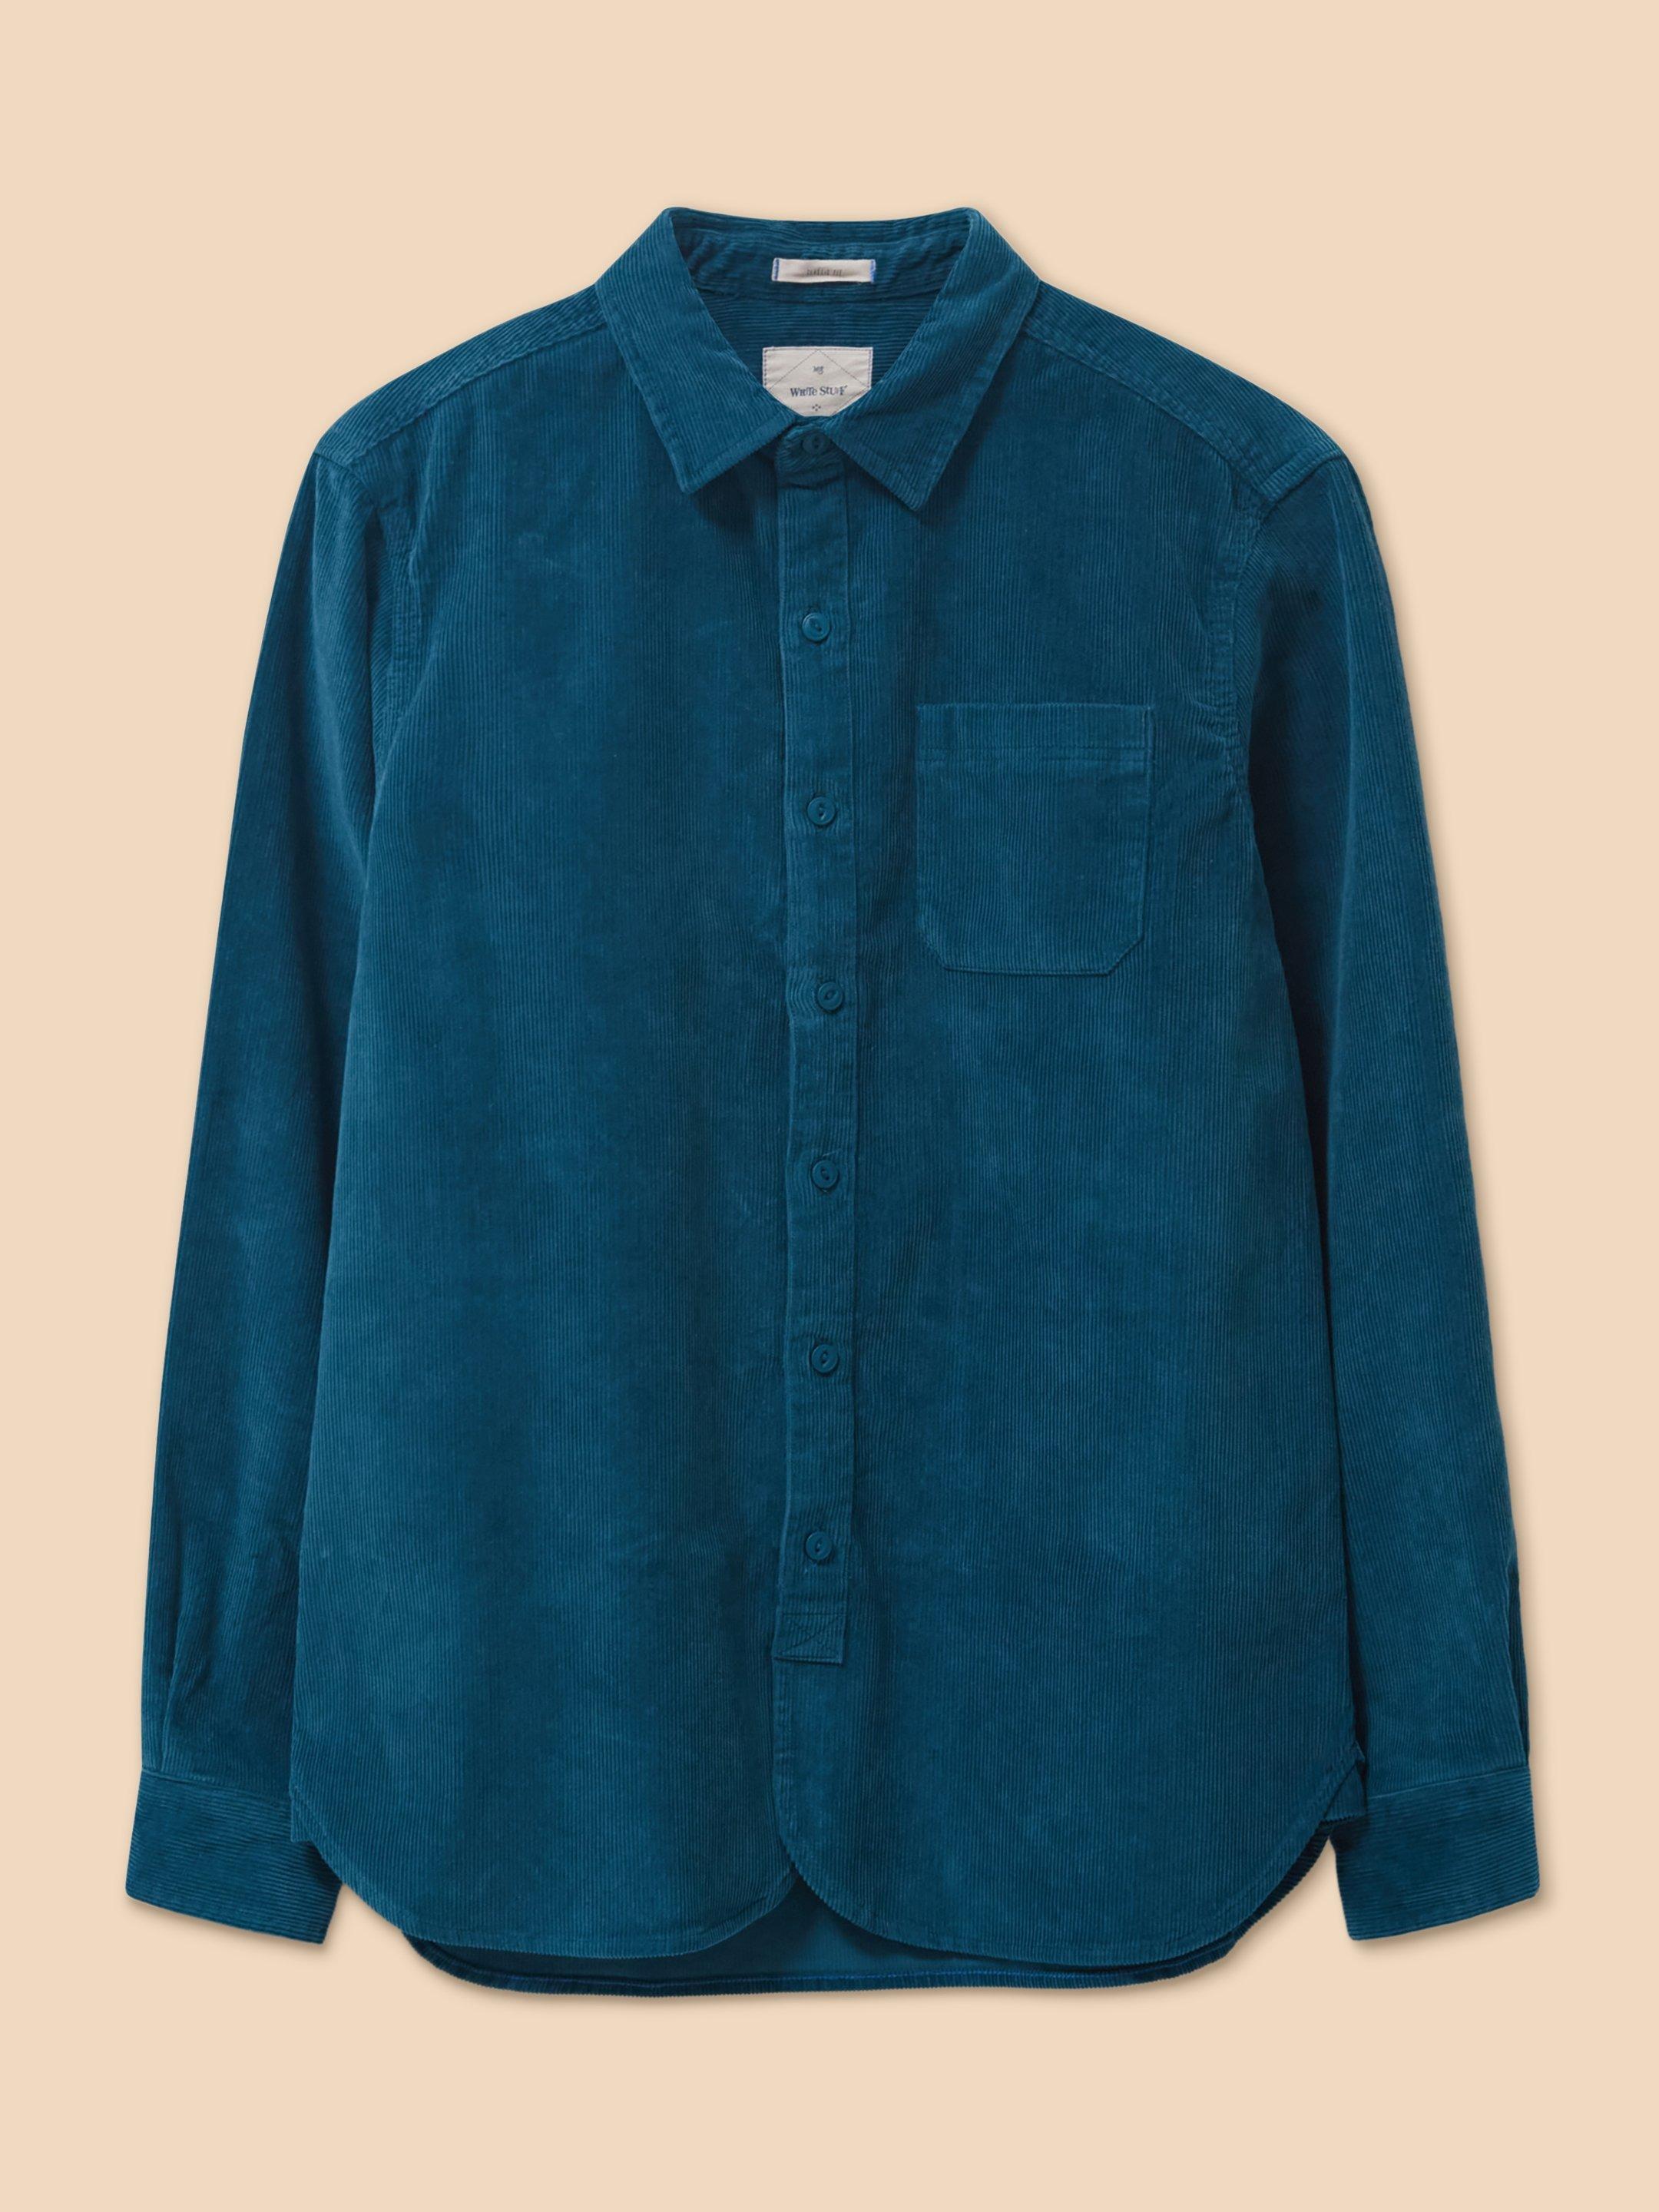 Whitwick Cord Shirt in MID TEAL - FLAT FRONT